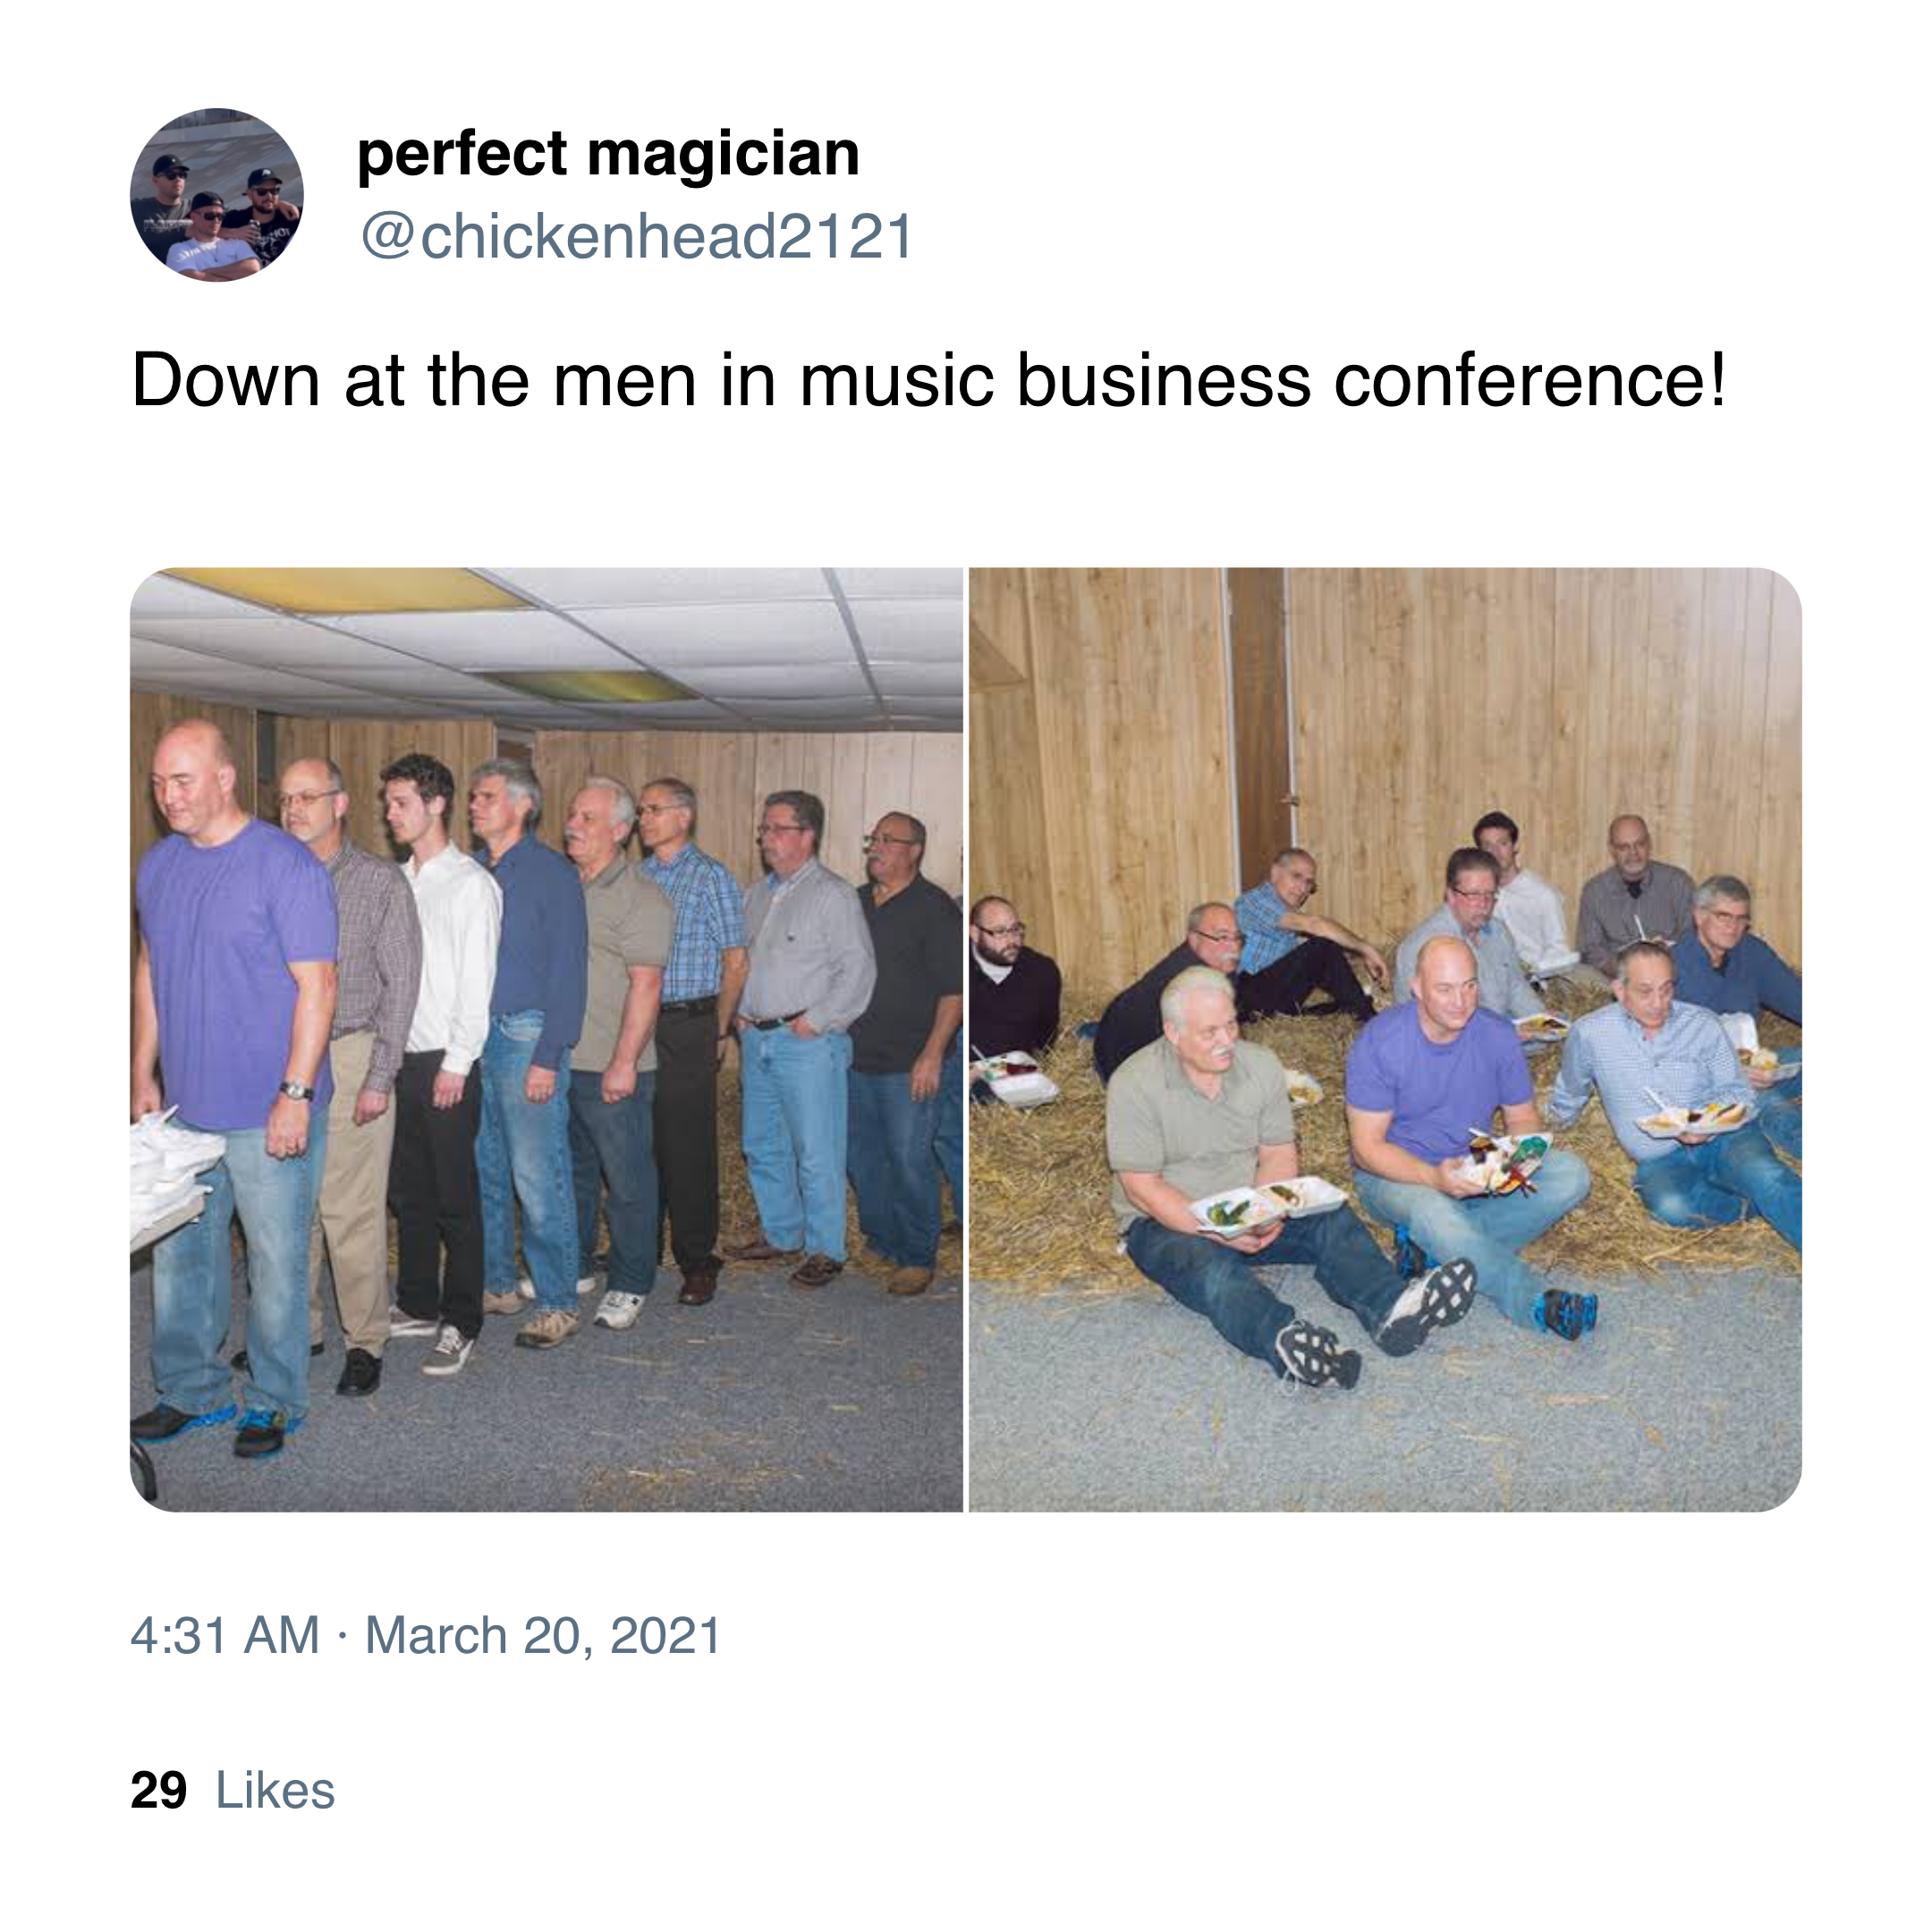 @chickenhead2121 on Twitter: "Down at the men in music business conference!" Two photos from the Dadsgiving viral photoset included.